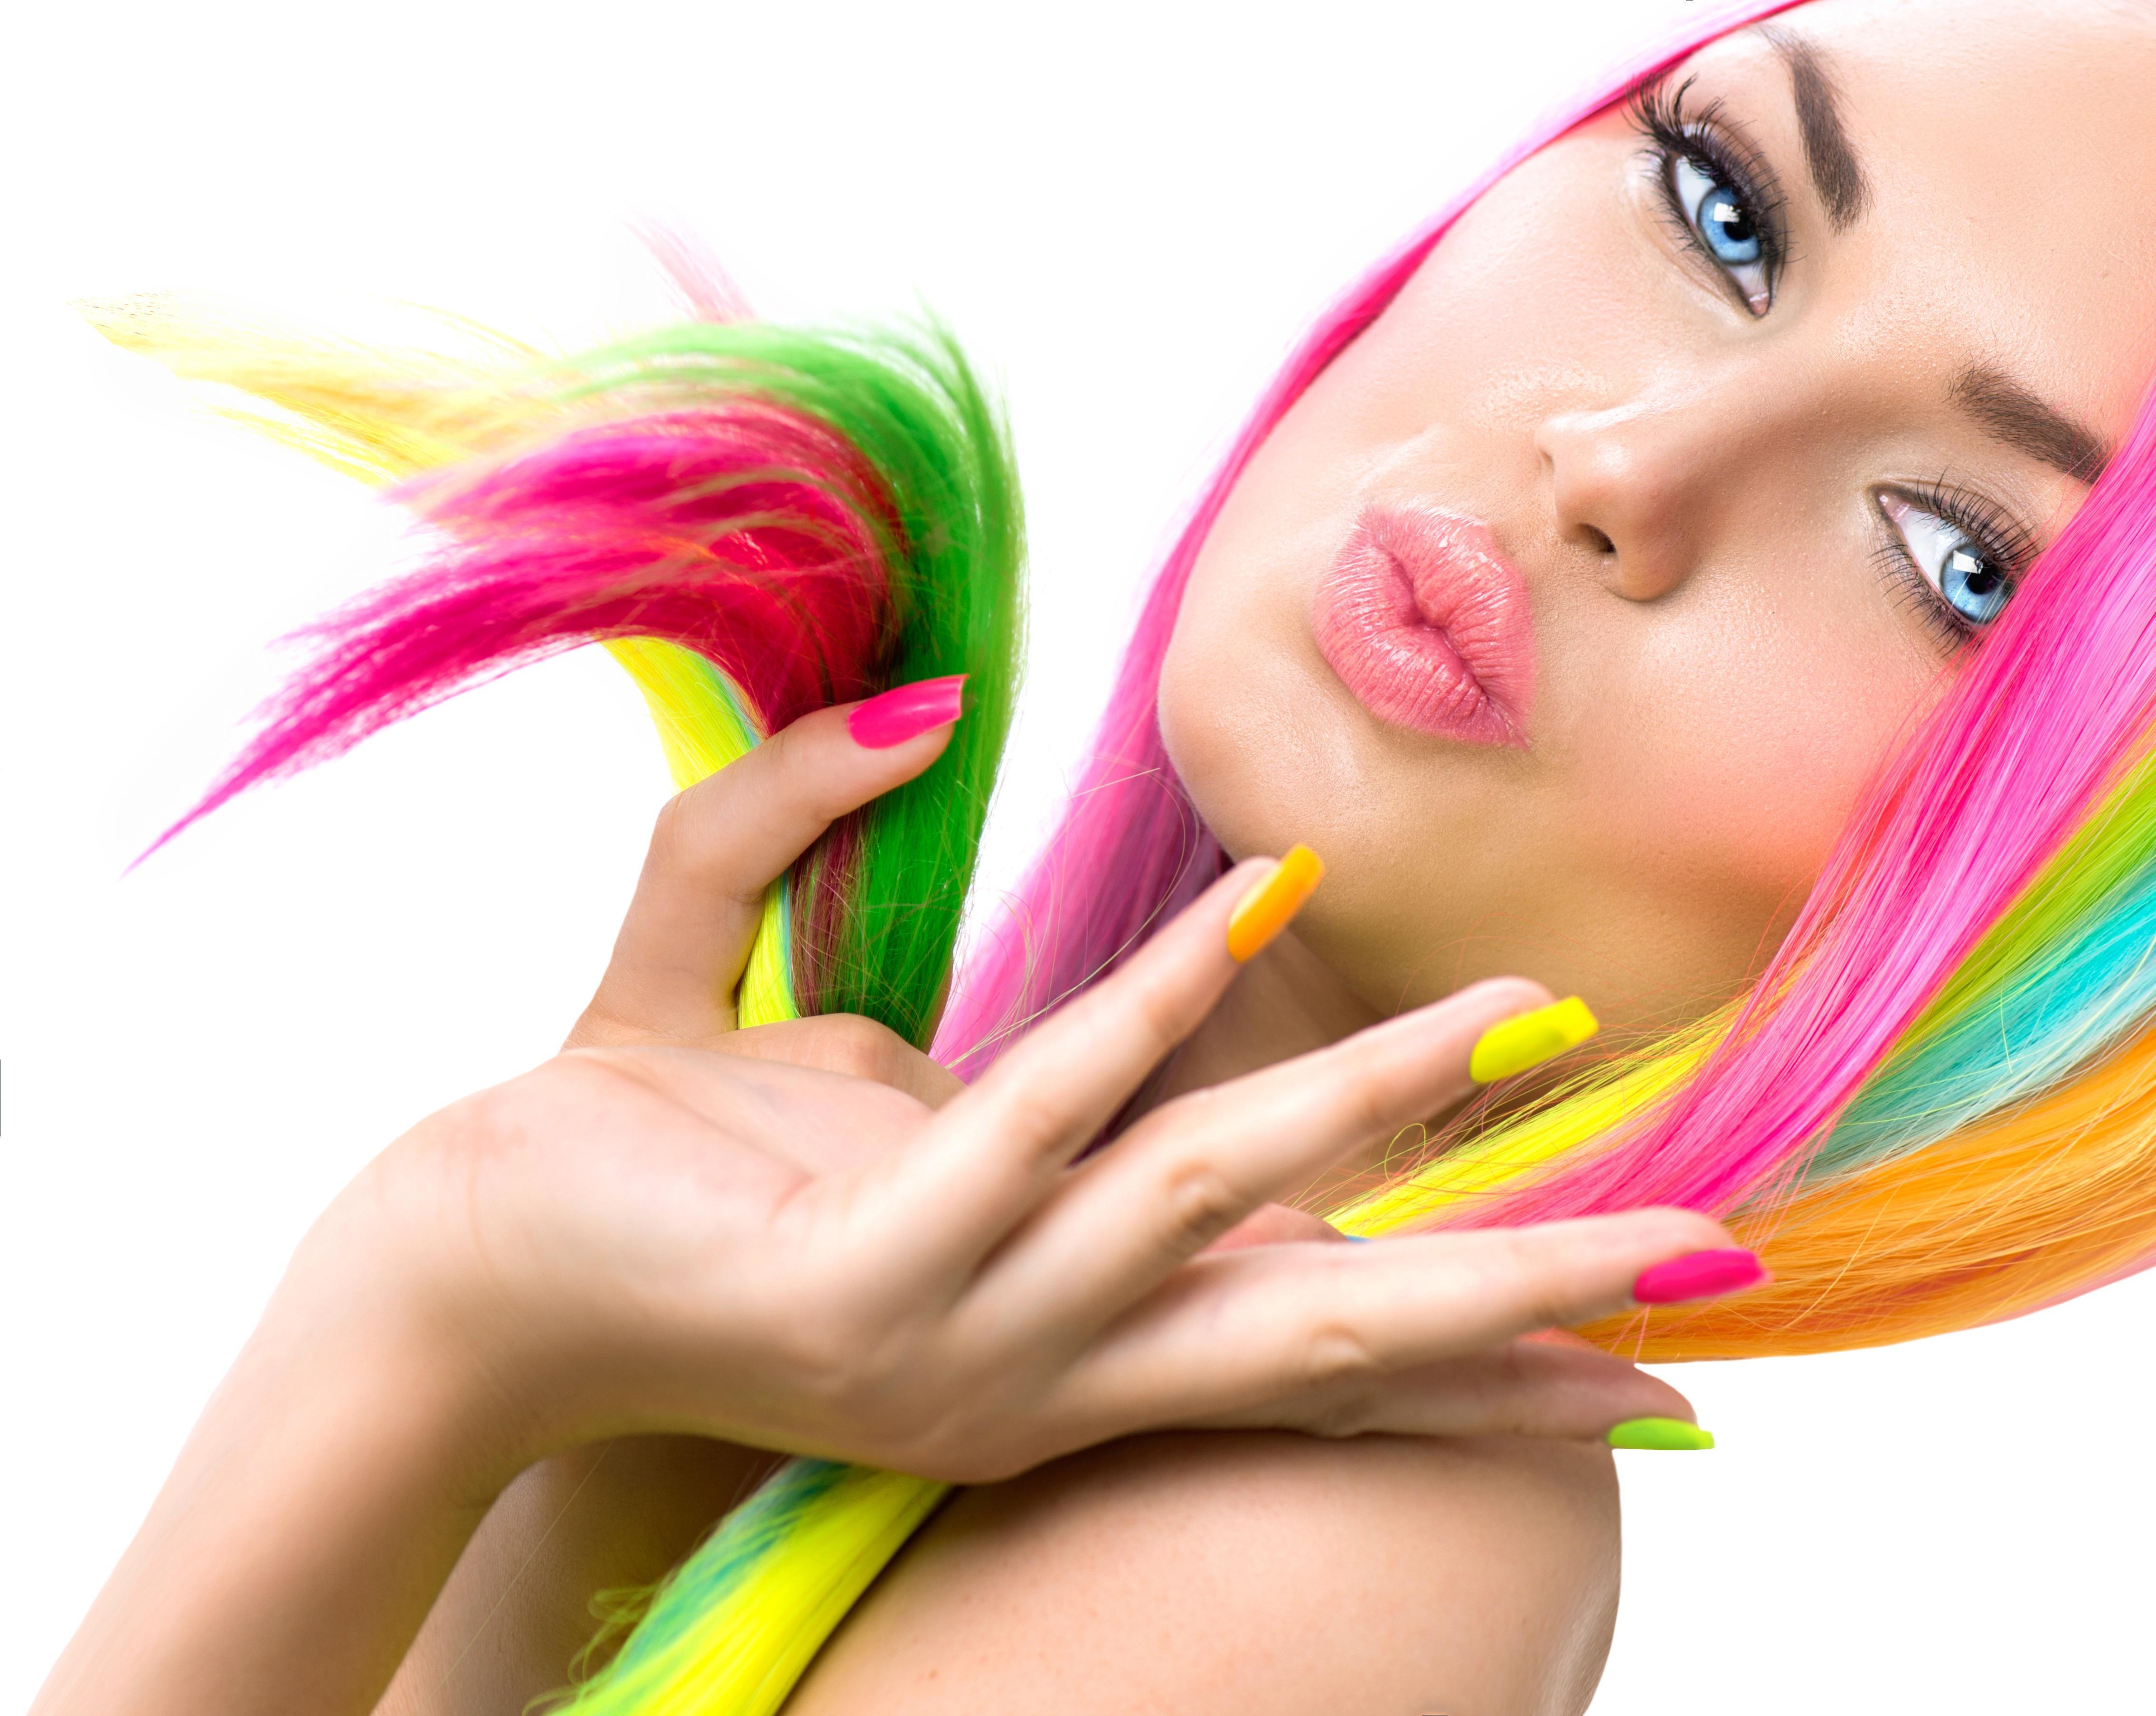 Woman with Rainbow Hair 4k Ultra HD Wallpaper. Background Image